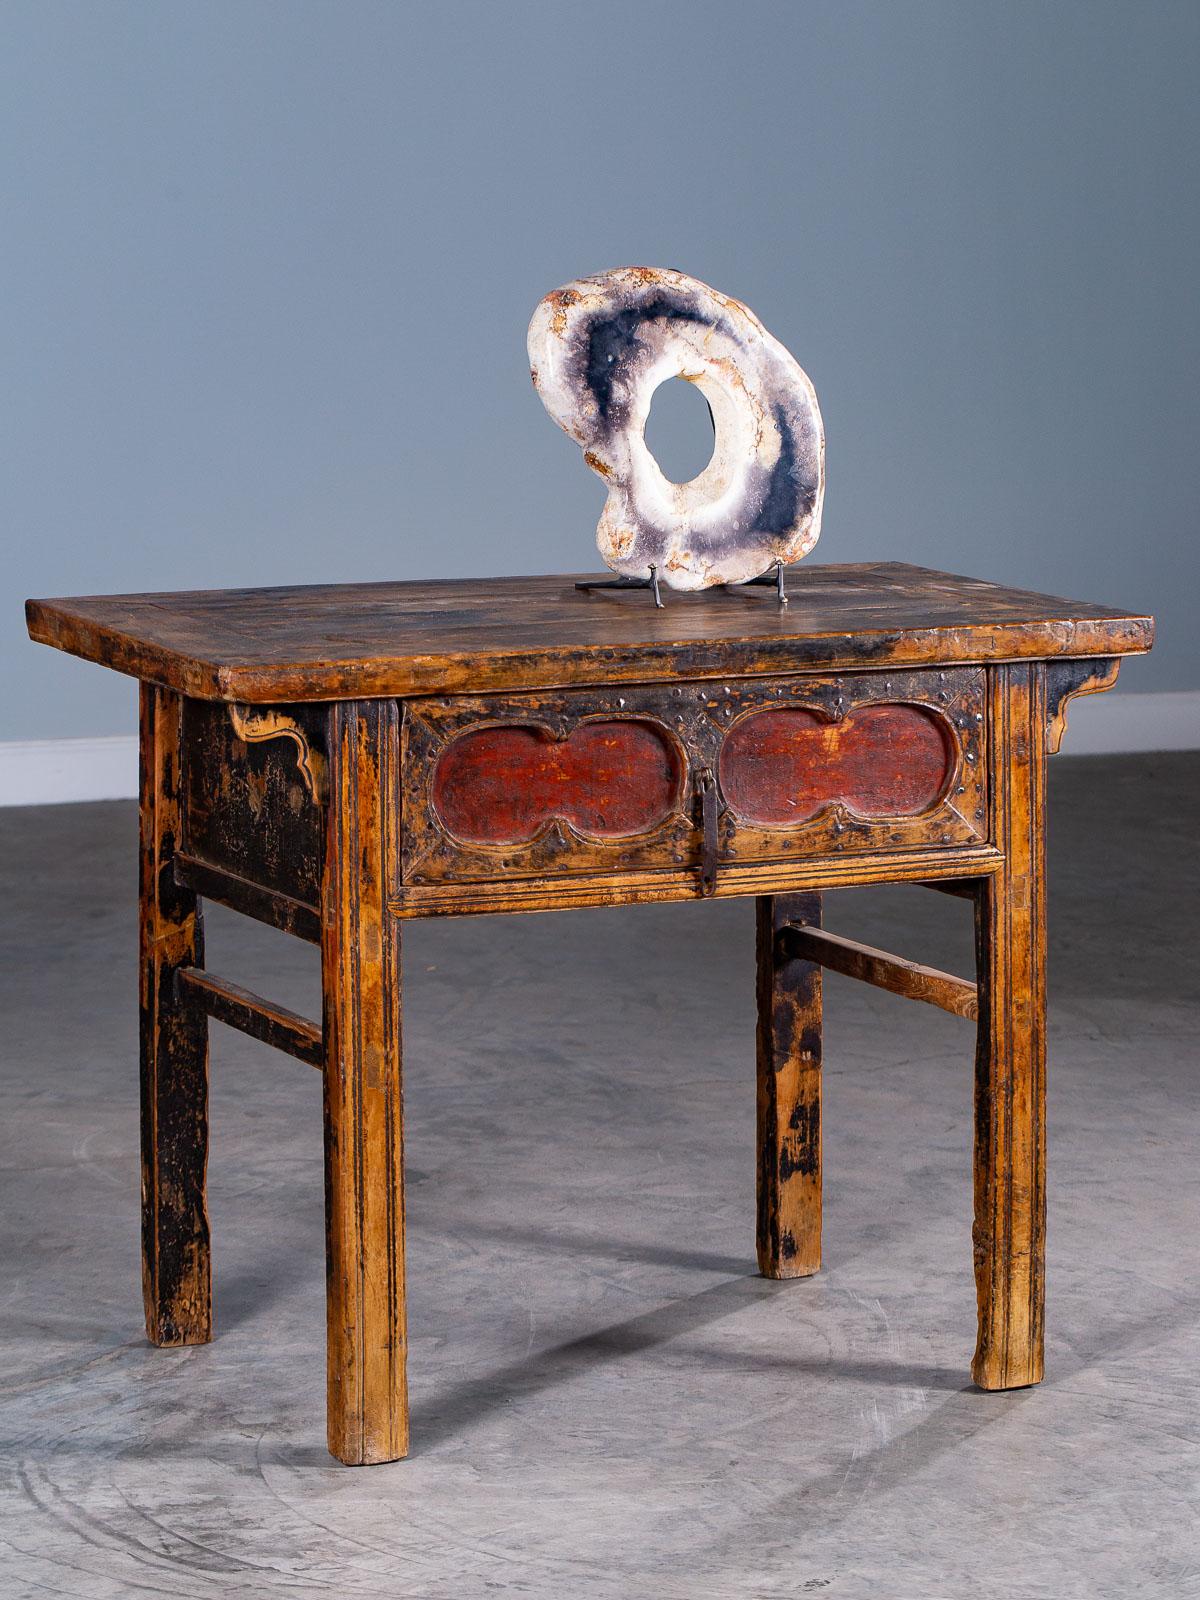 This good example of an antique Chinese table with a single wide drawer from Kuang Hsu period China, circa 1875 has a beautifully weathered surface still showing traces of the original lacquered finish in both black and red. The combination of color